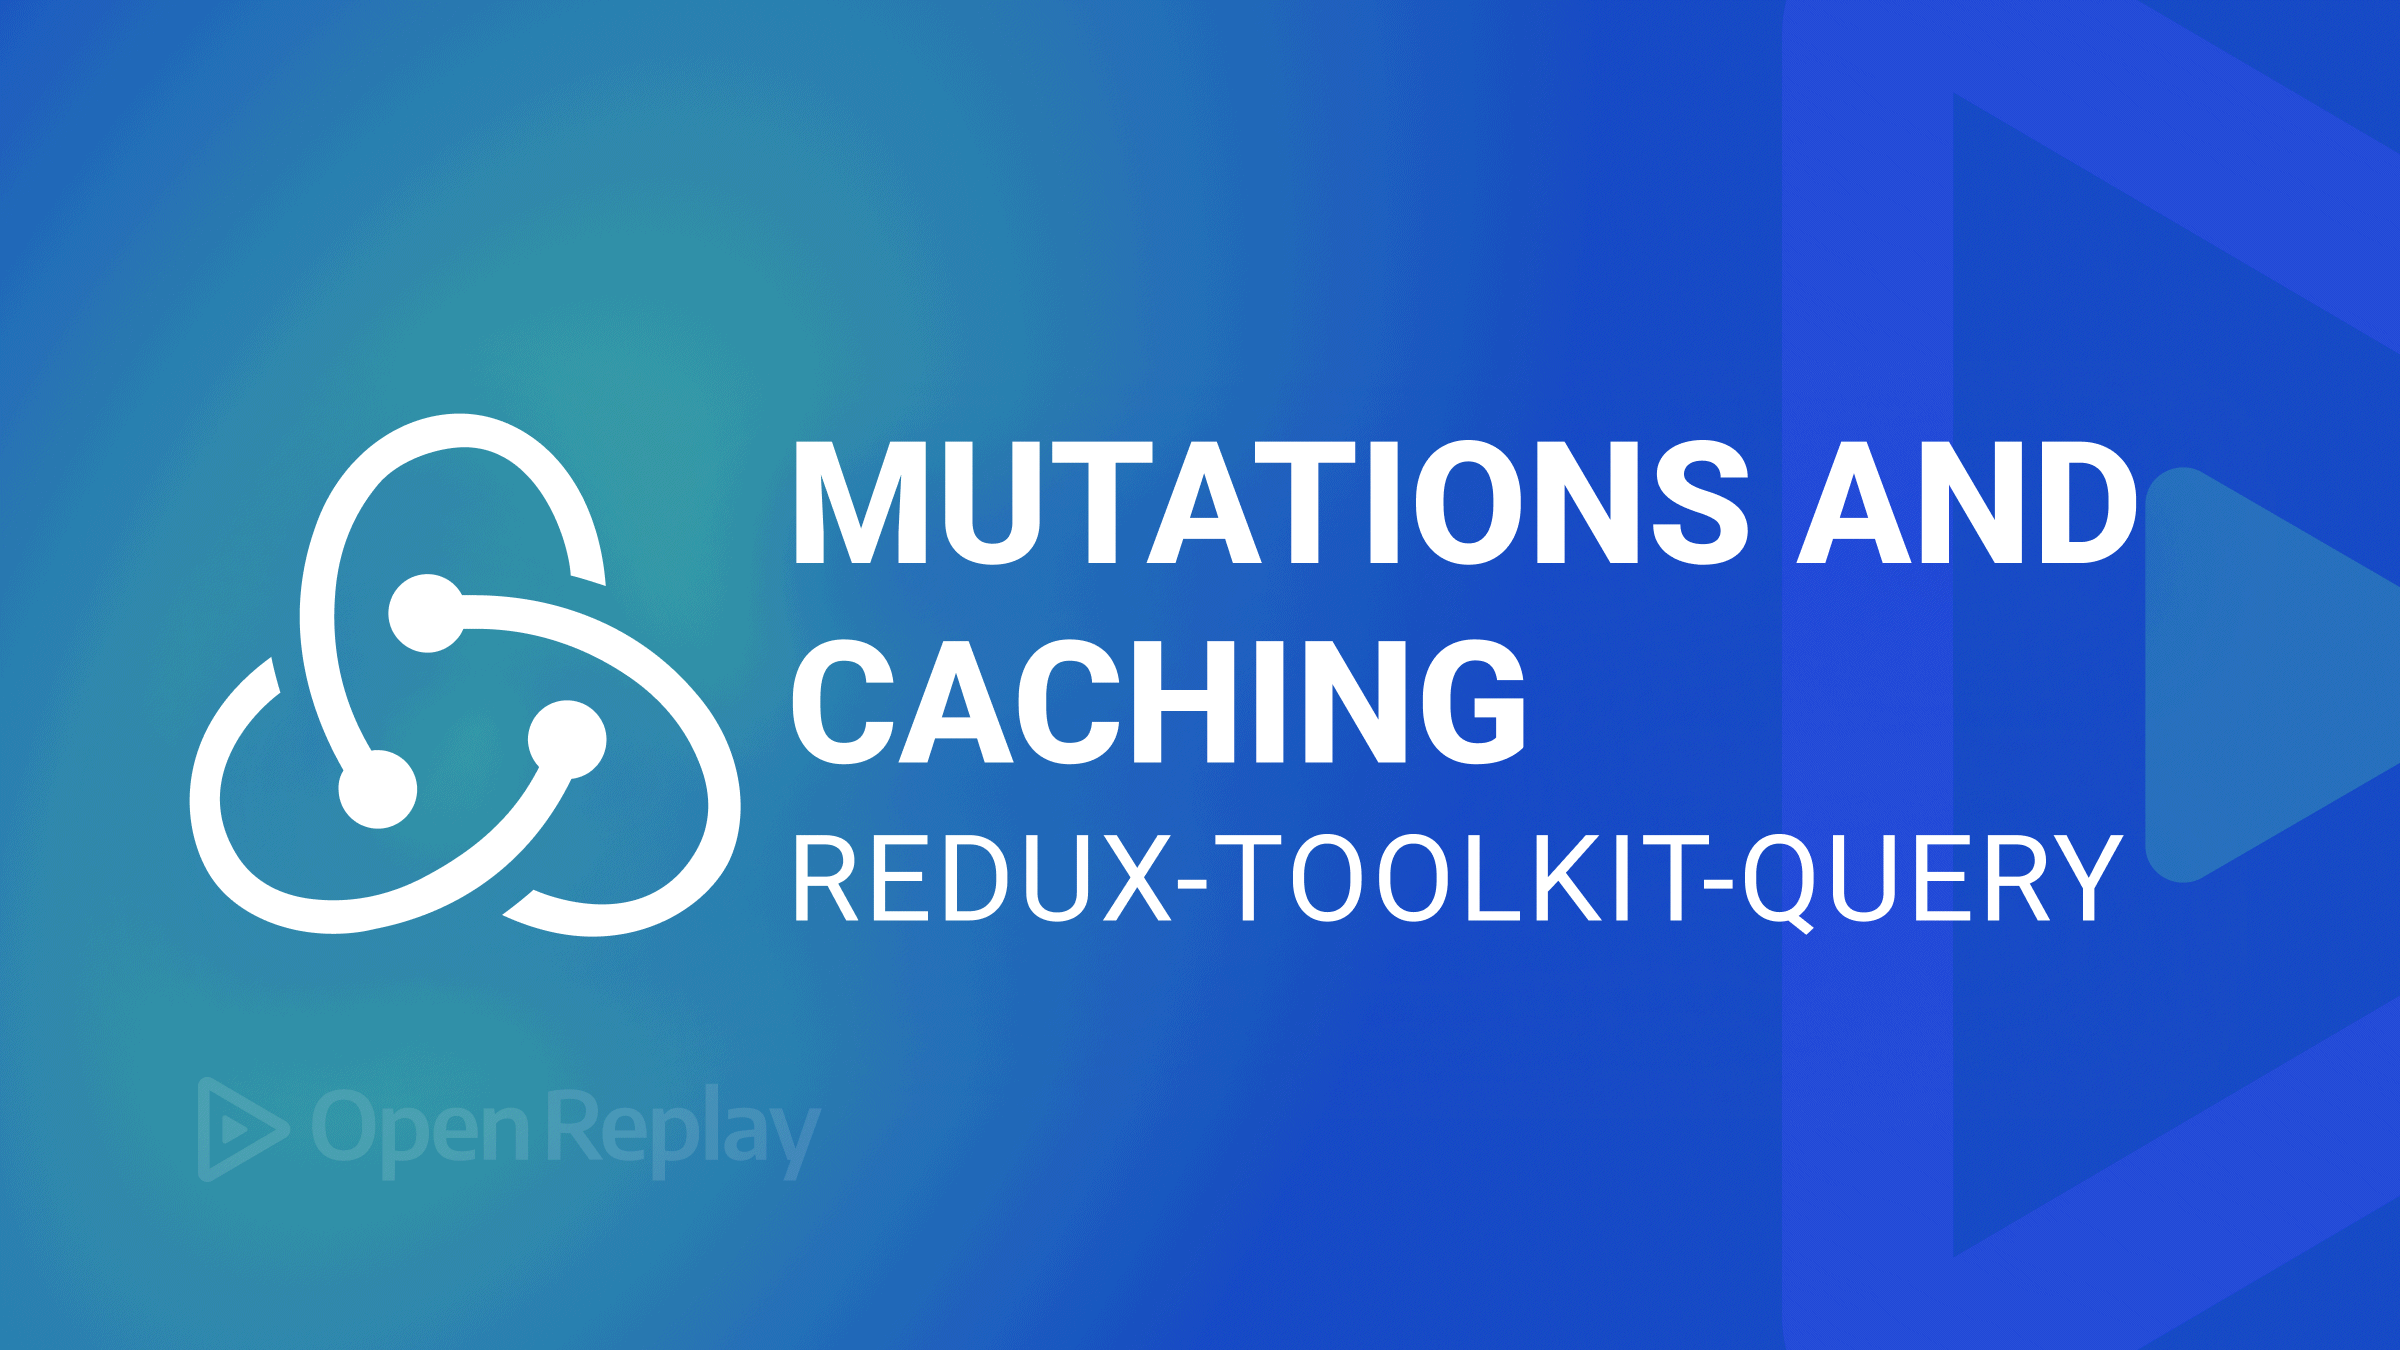 Mutations And Caching With Redux-Toolkit-Query